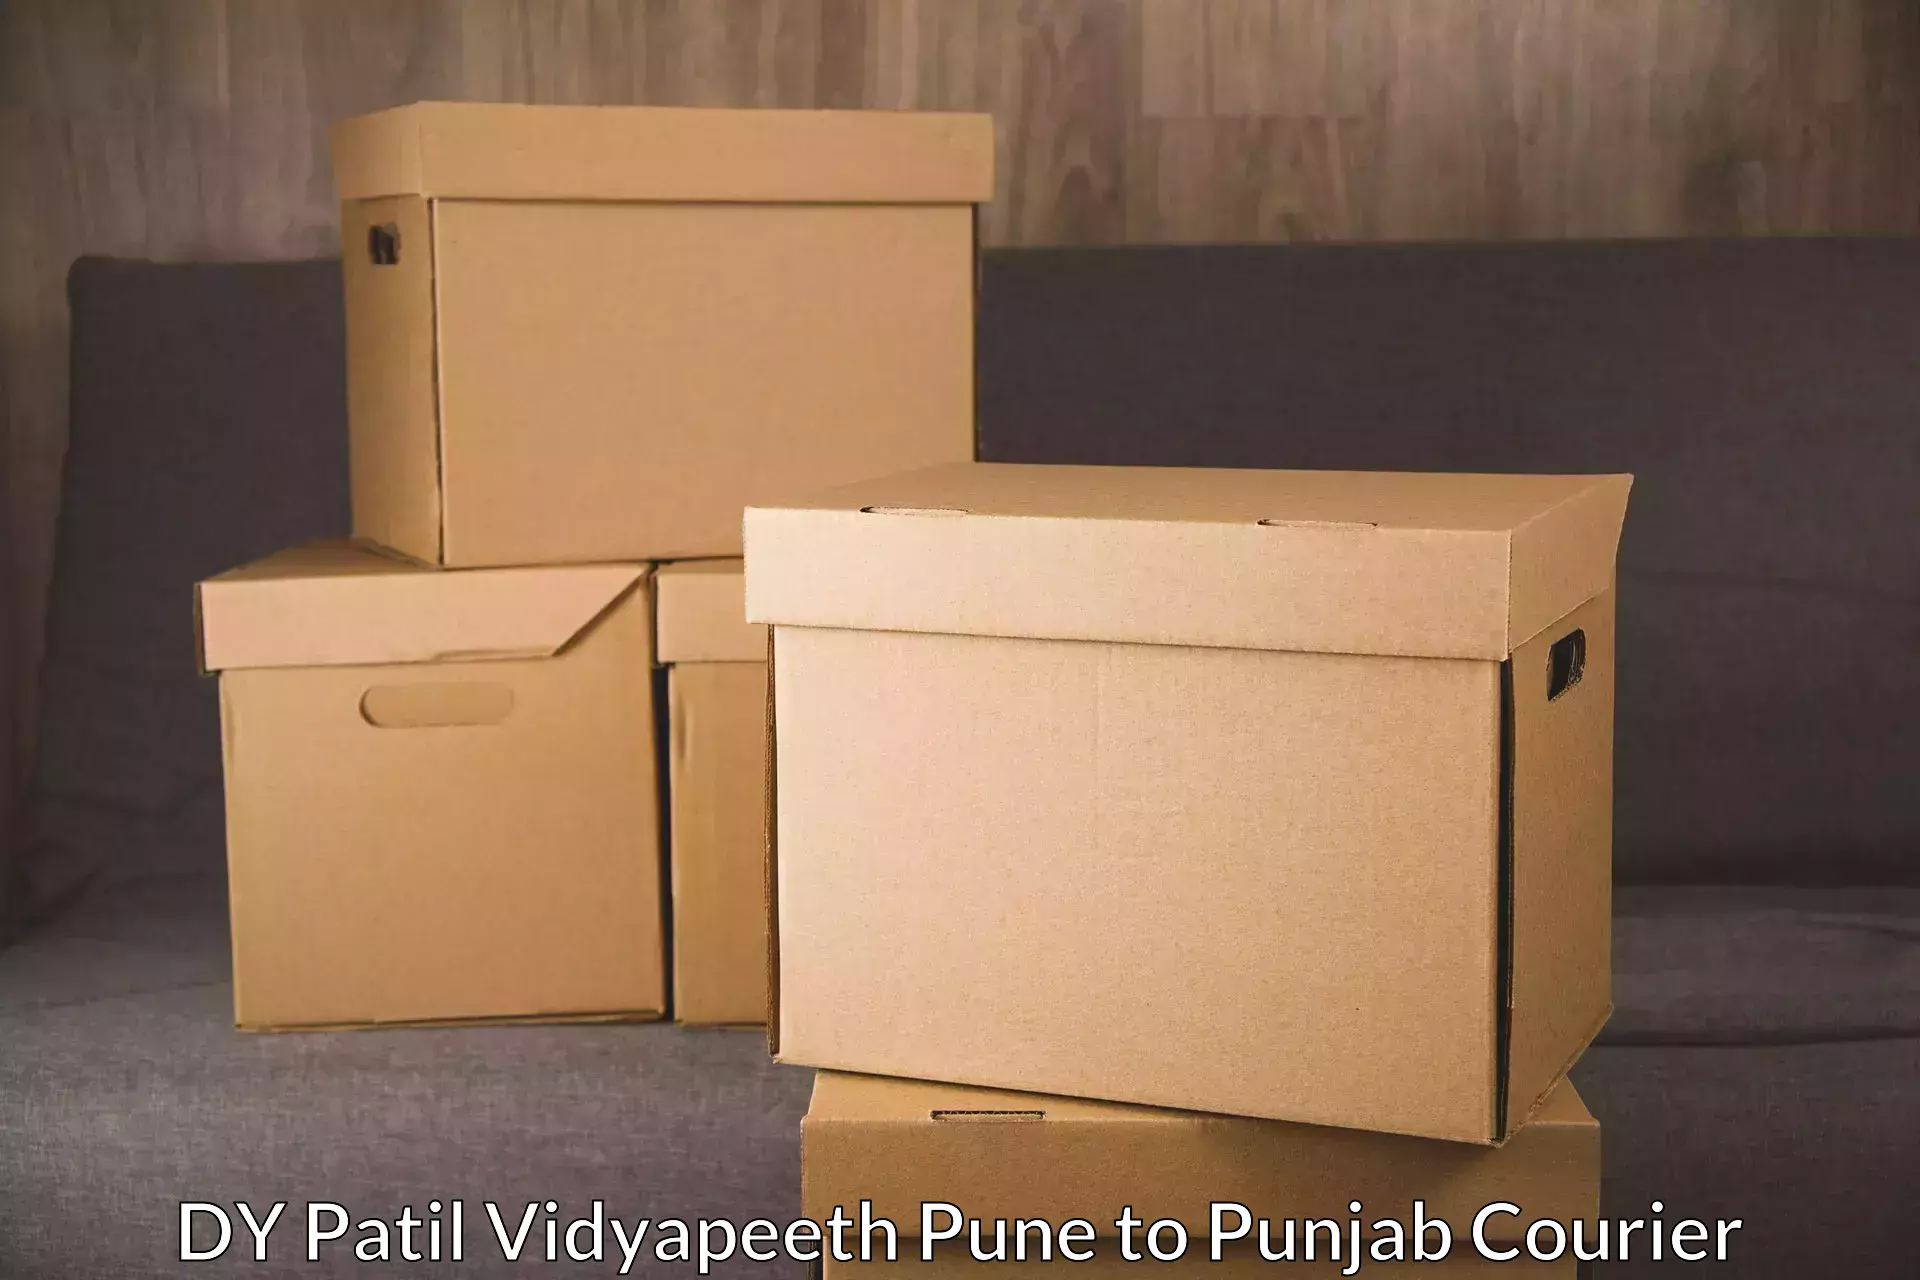 Pharmaceutical courier DY Patil Vidyapeeth Pune to Jagraon